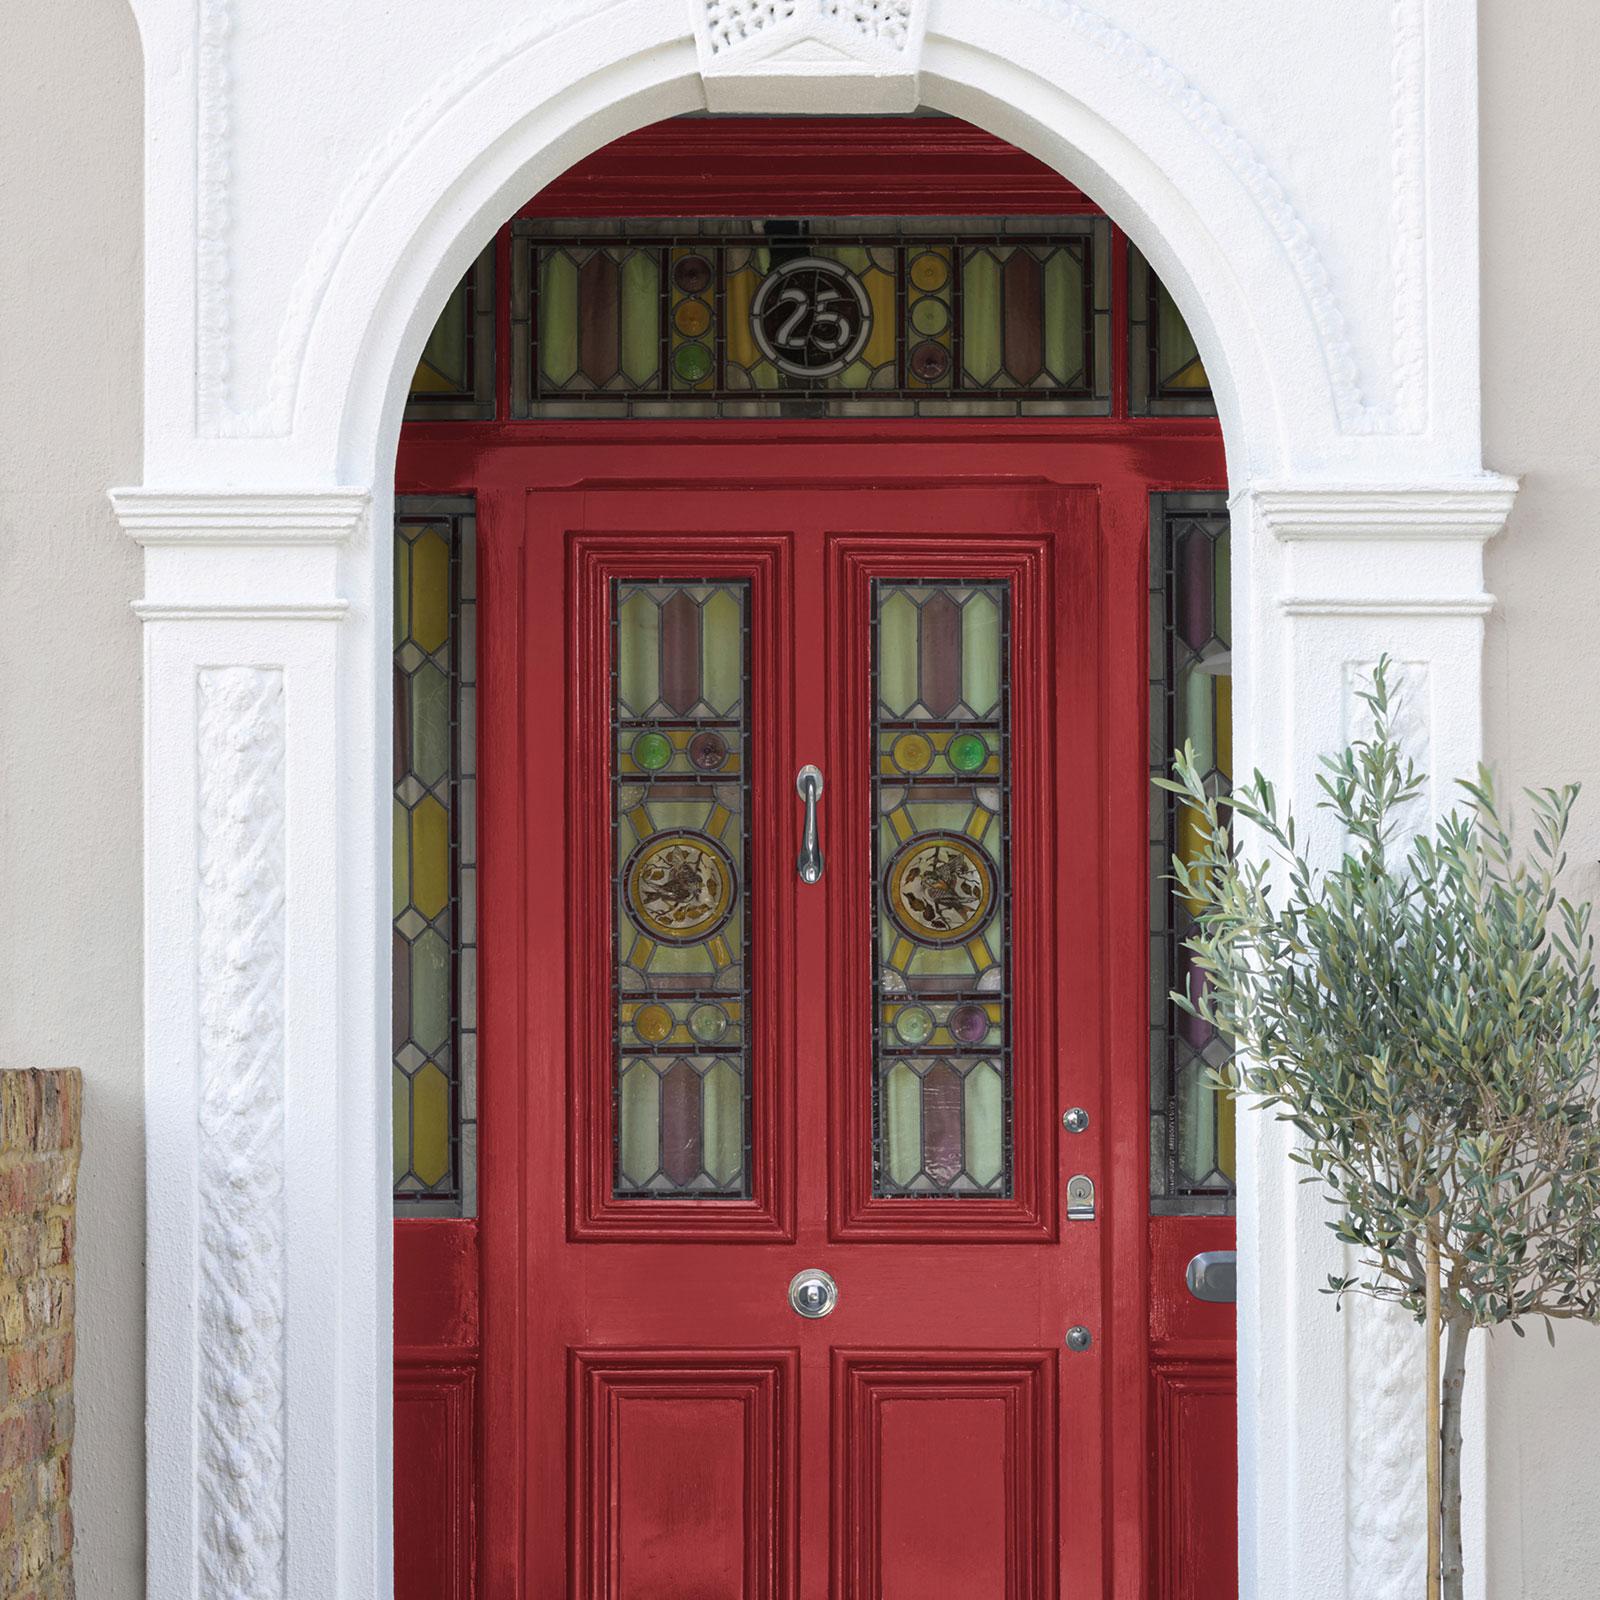 Photograph of a front door painted red.